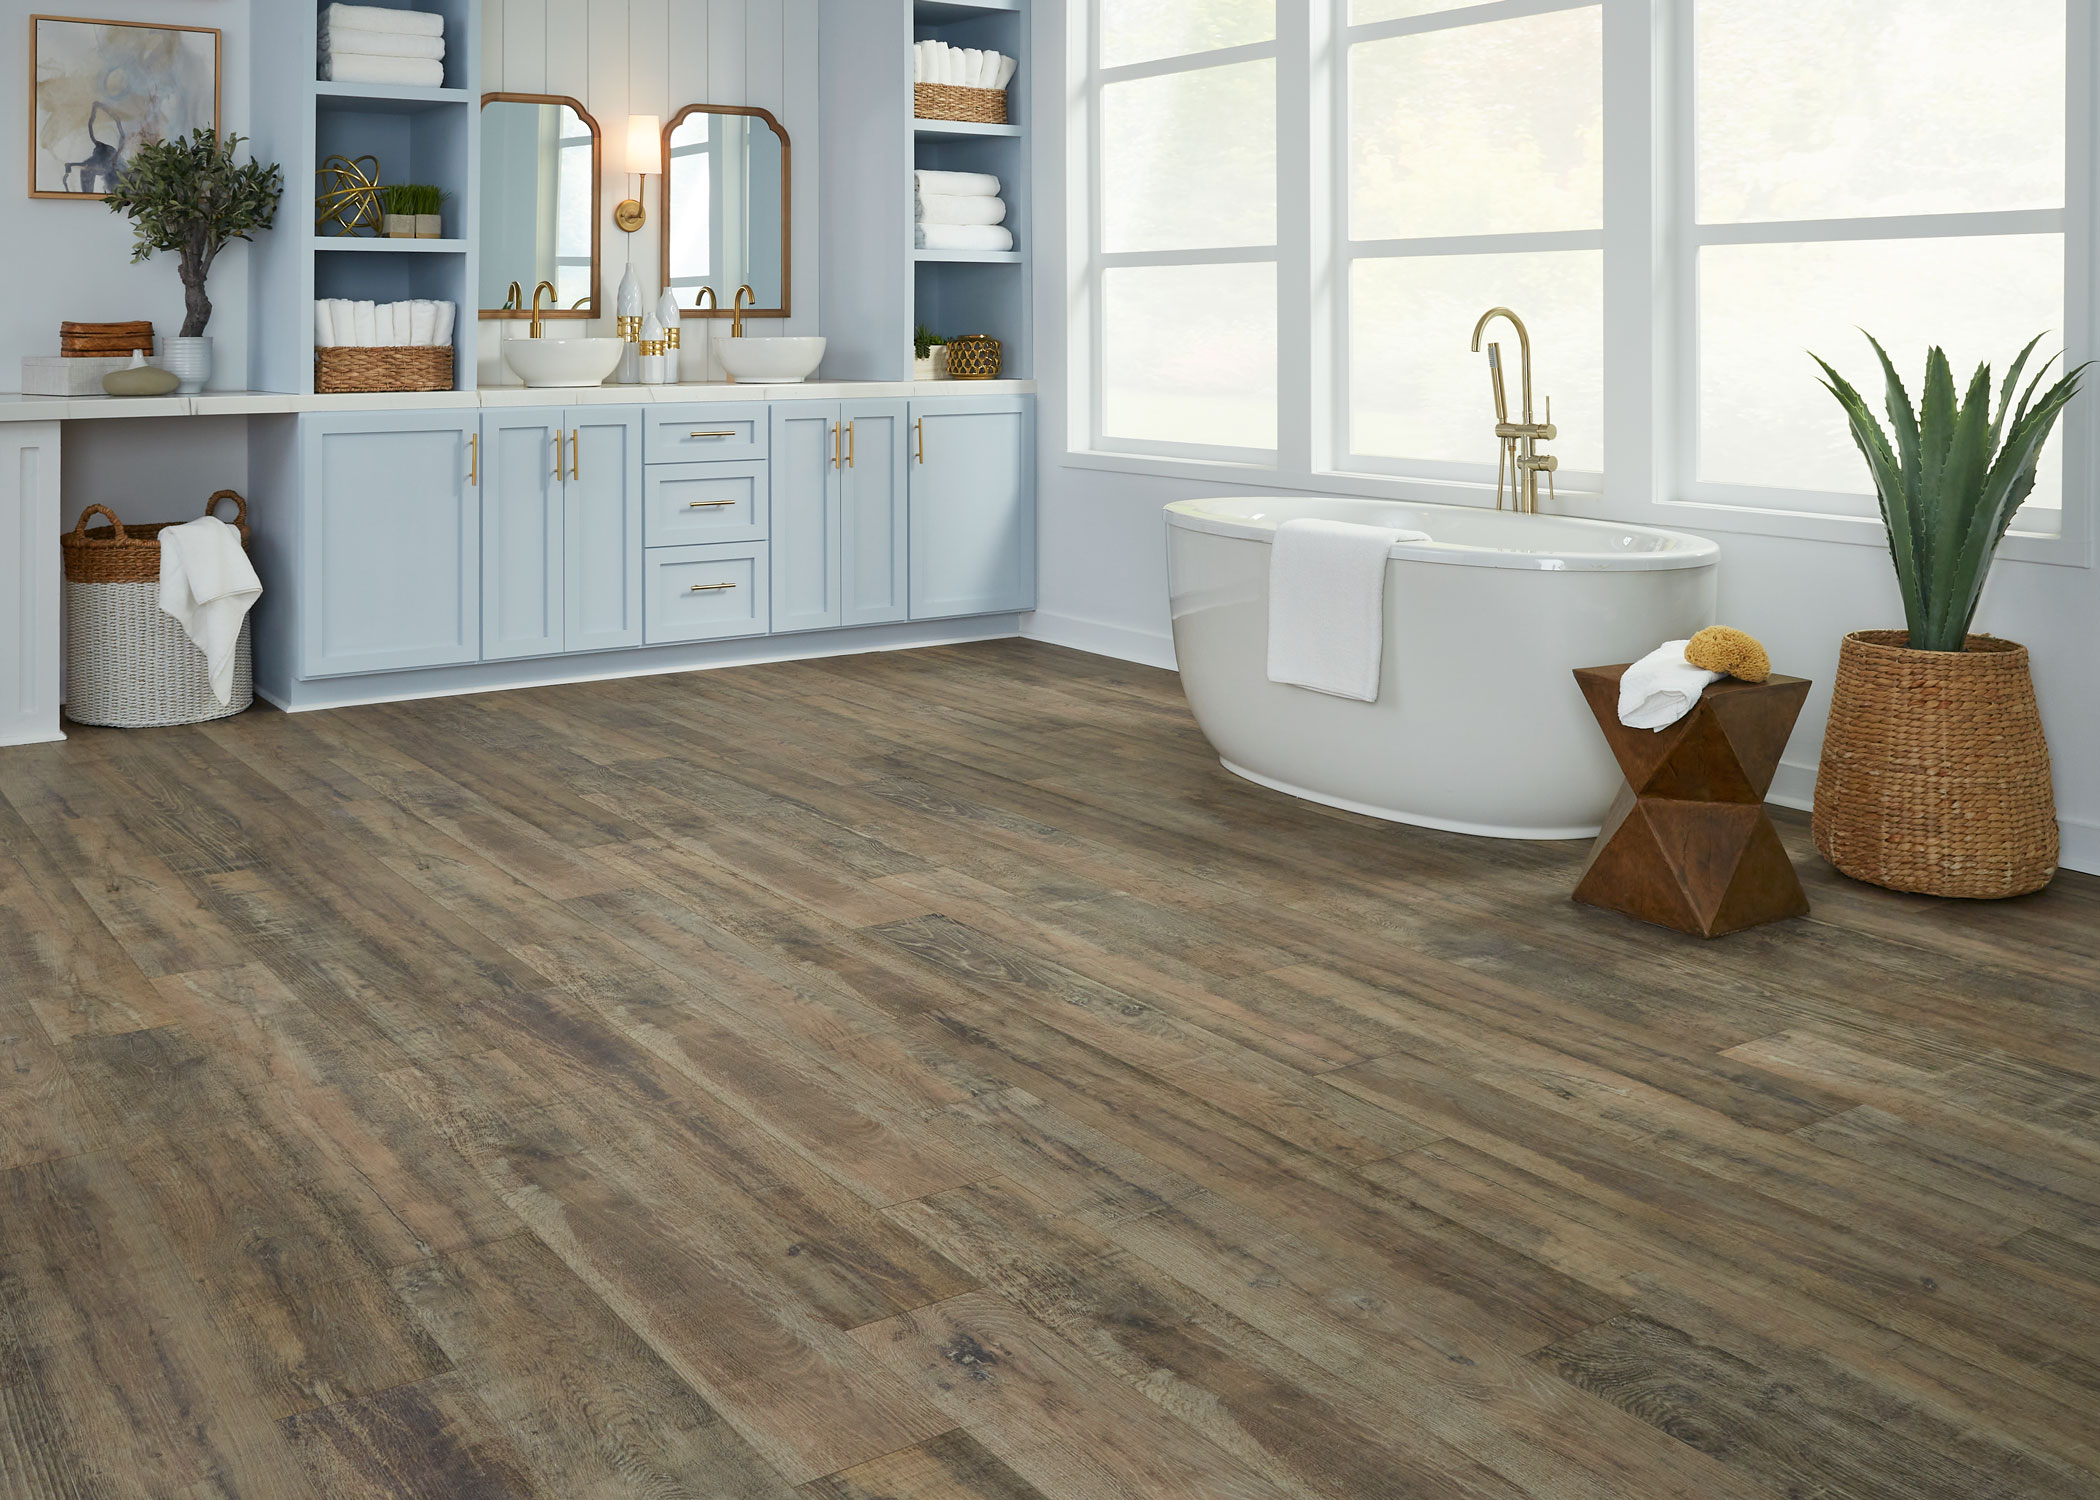 multi toned brown waterproof hybrid resilient flooring in bathroom with pale blue cabinets with dual vessel sinks and white oval freestanding tub